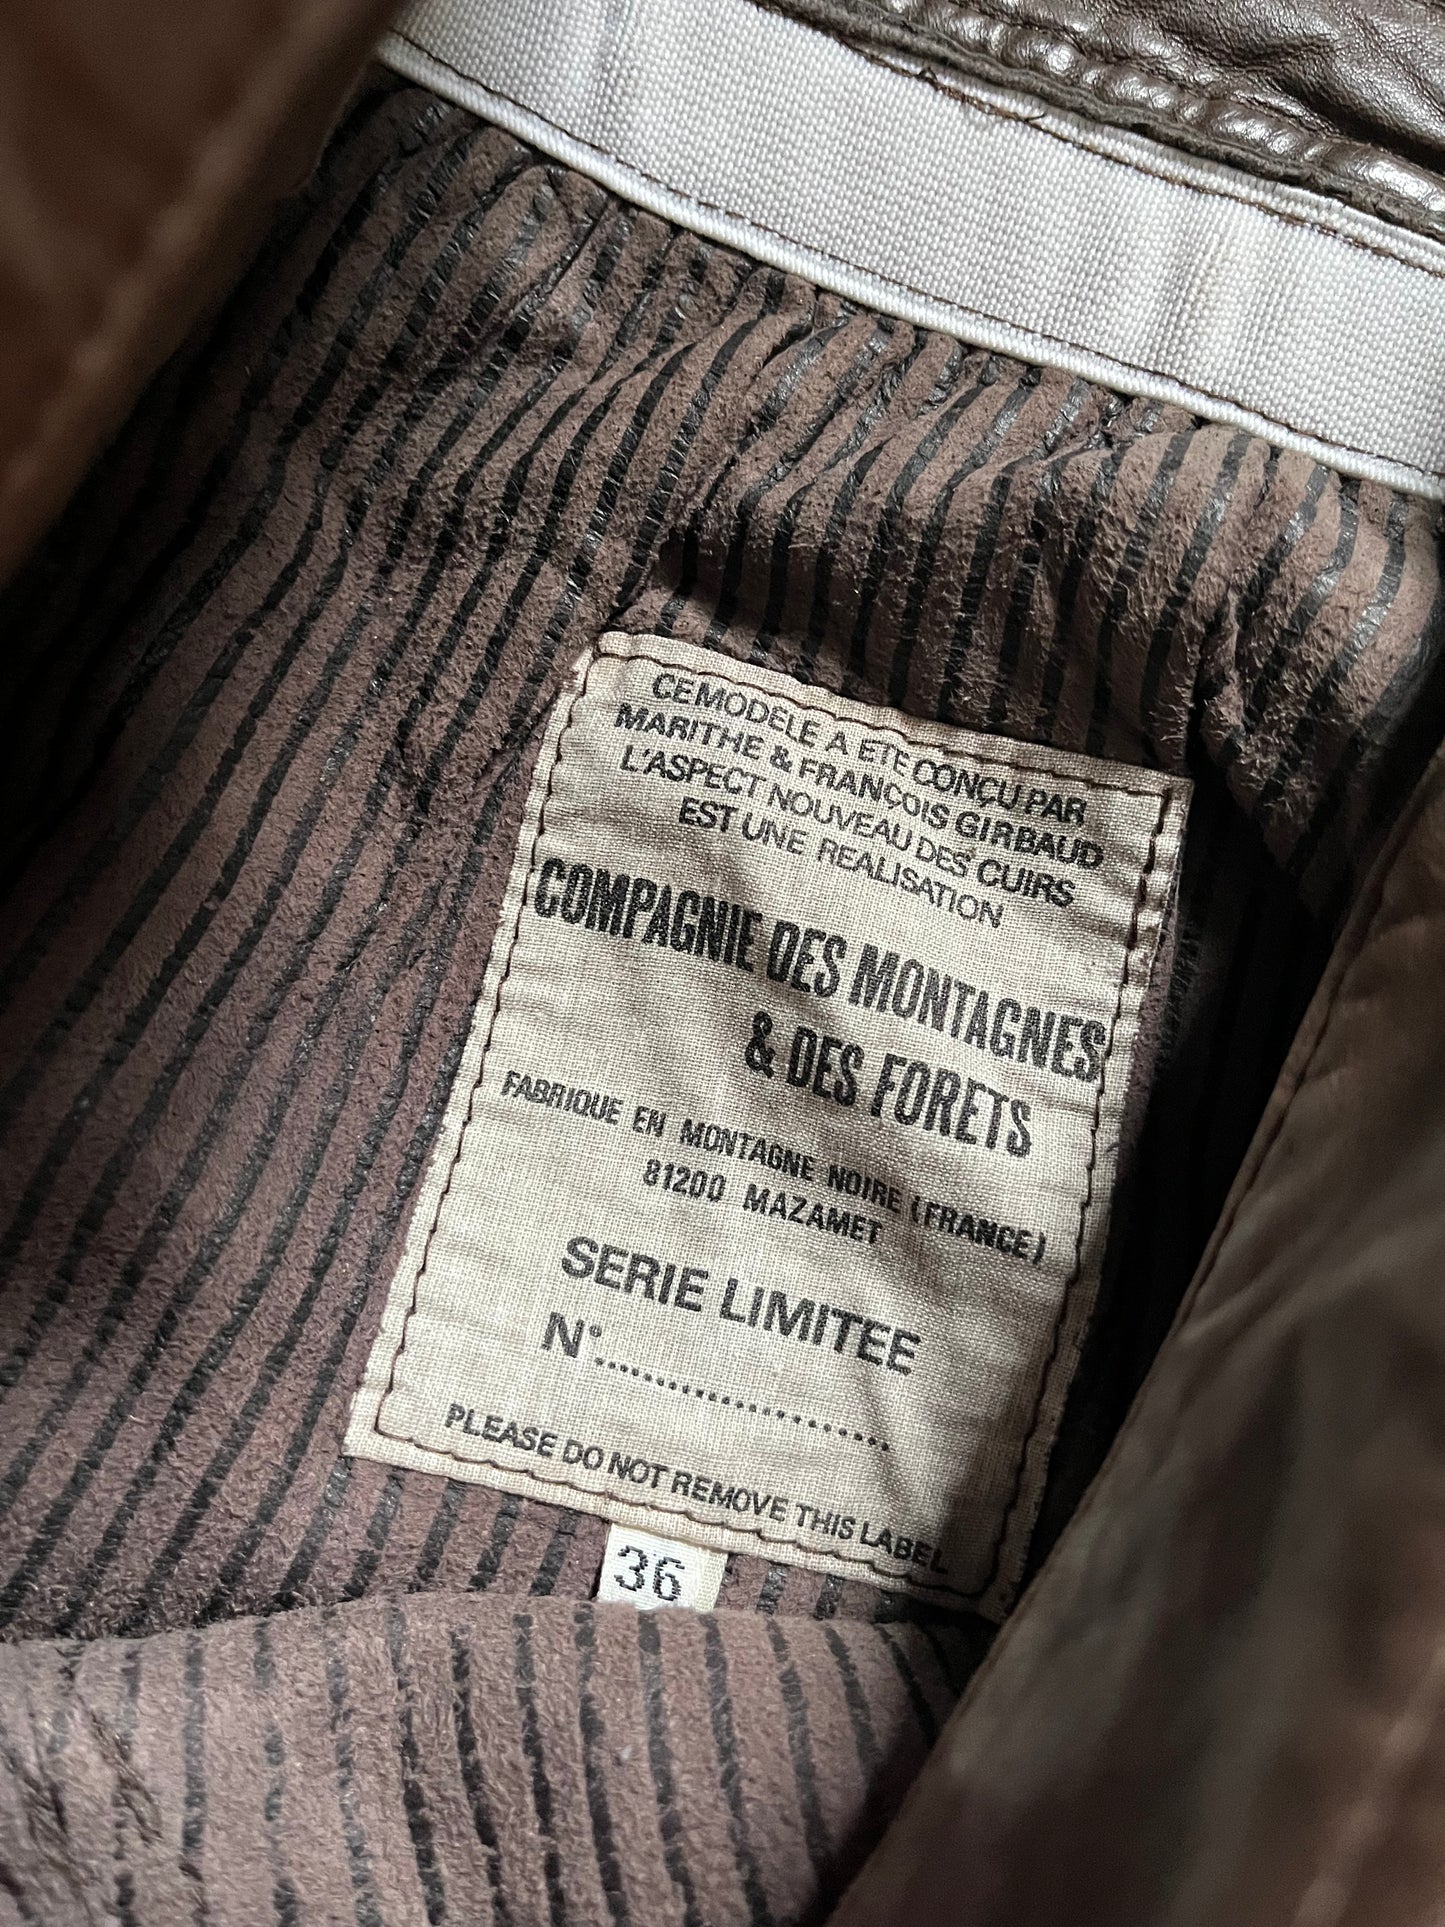 1983 Marithé + François Girbaud Limited French Artisanal Fabric Brown Leather Pants (S)